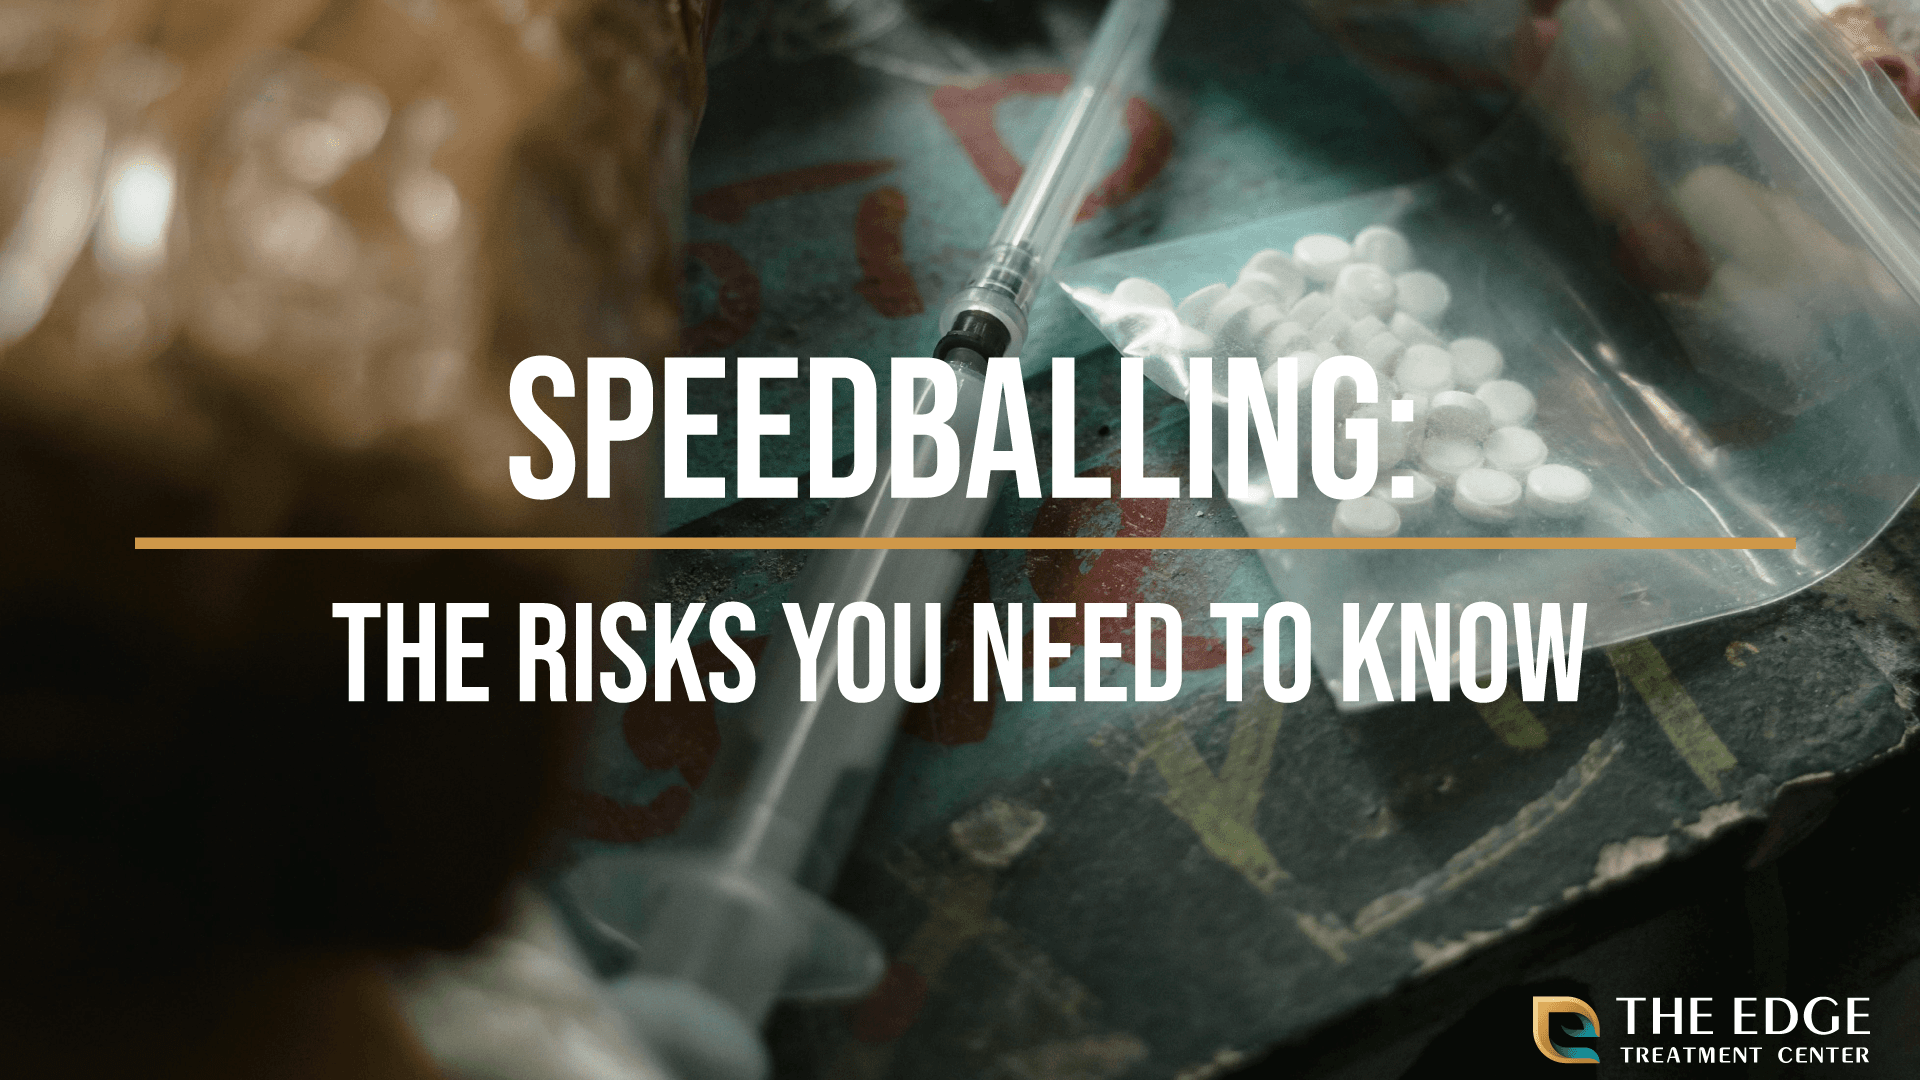 Speedballing: The Facts & Risk of Polydrug Abuse